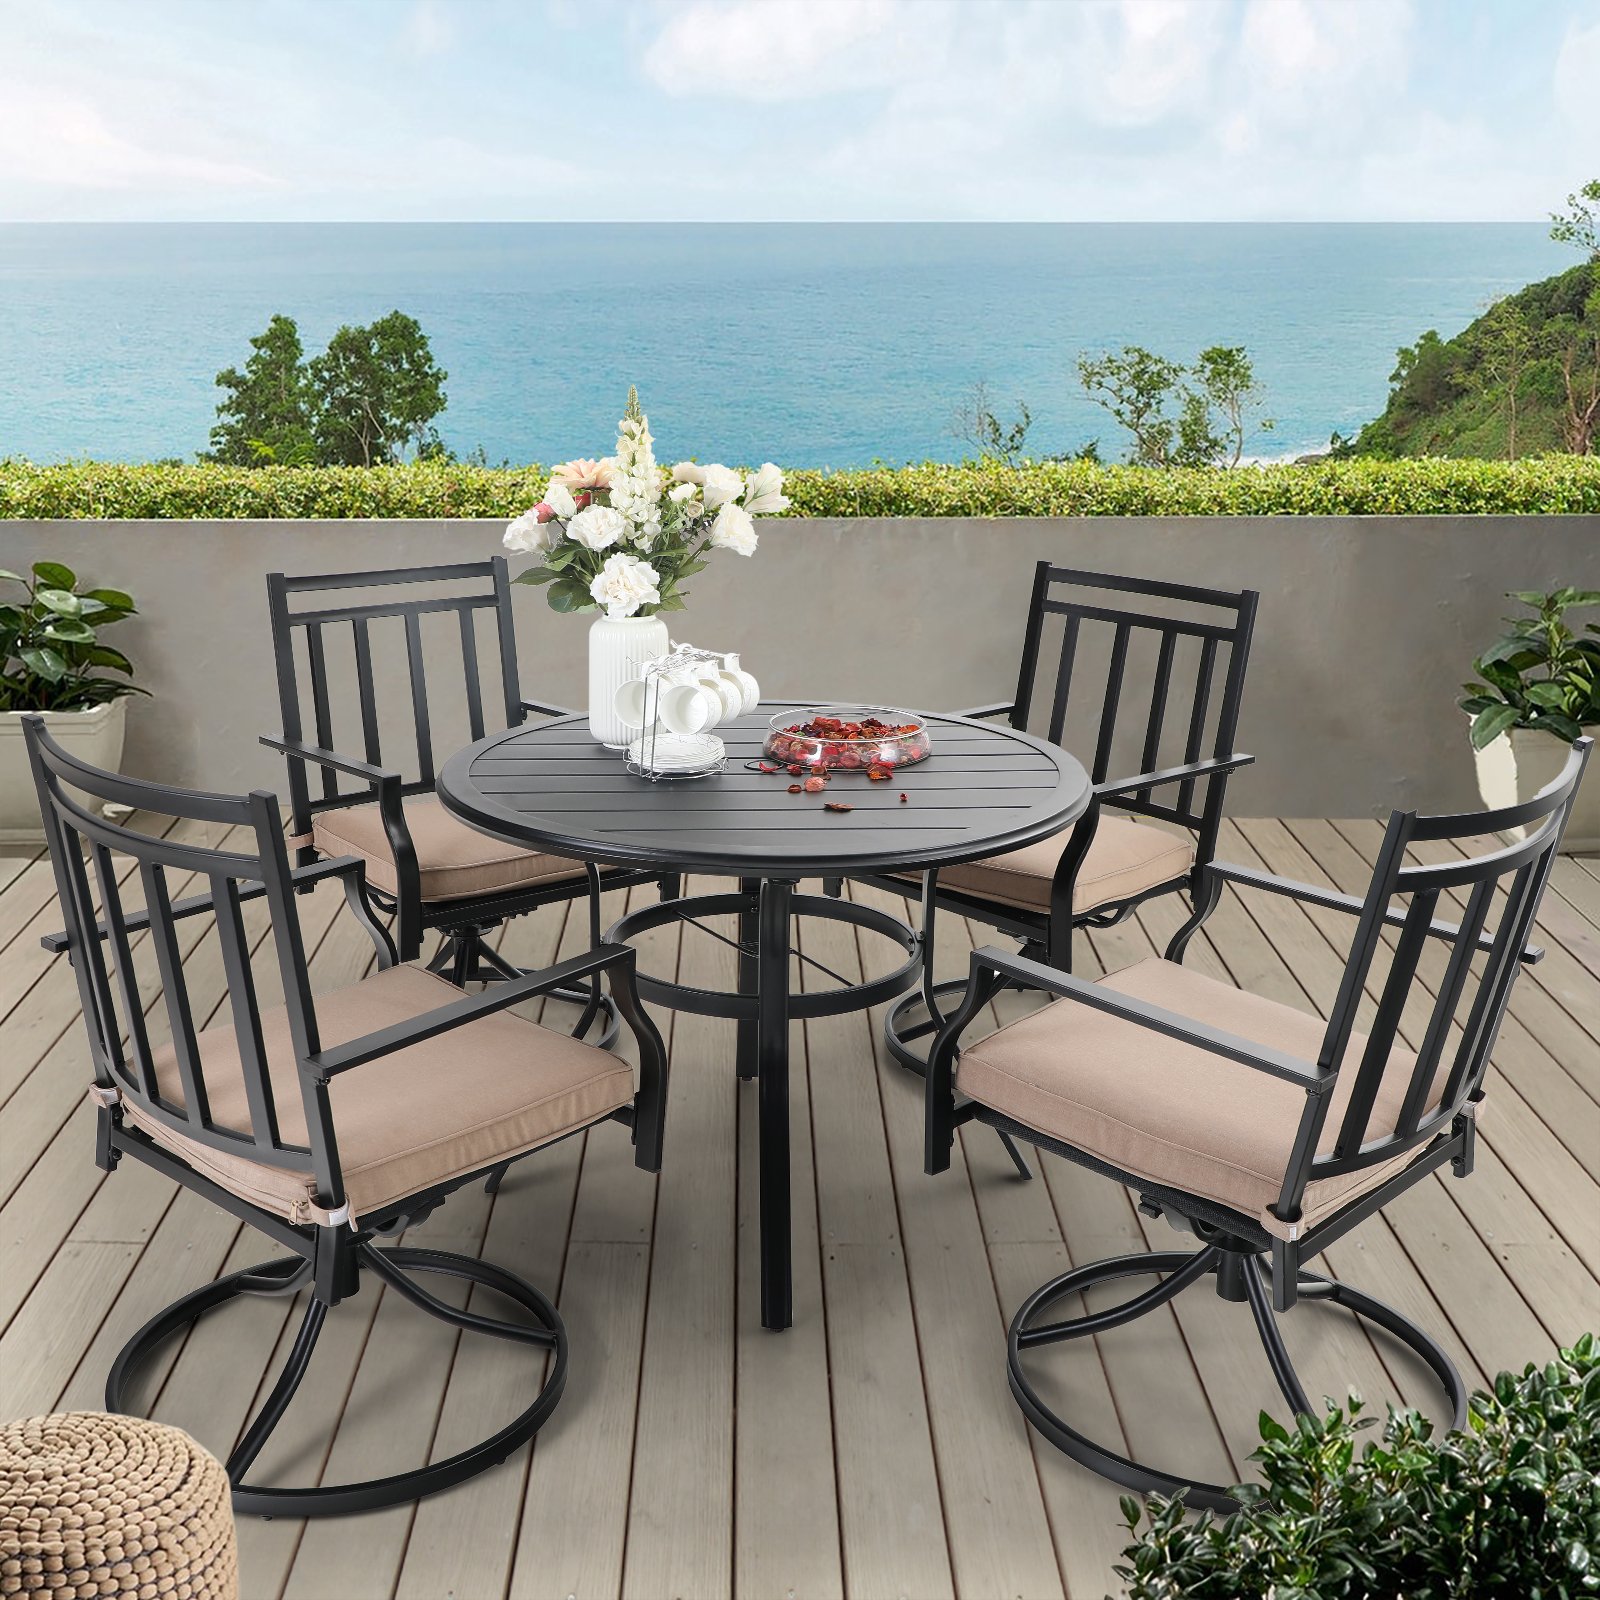 MF Studio 5 Pieces Patio Dining Sets with 4 Pieces Swivel Dining Chairs and 1 Piece Round Dining Table Suitable for 4 People, Beige Seat Cushion - image 1 of 7